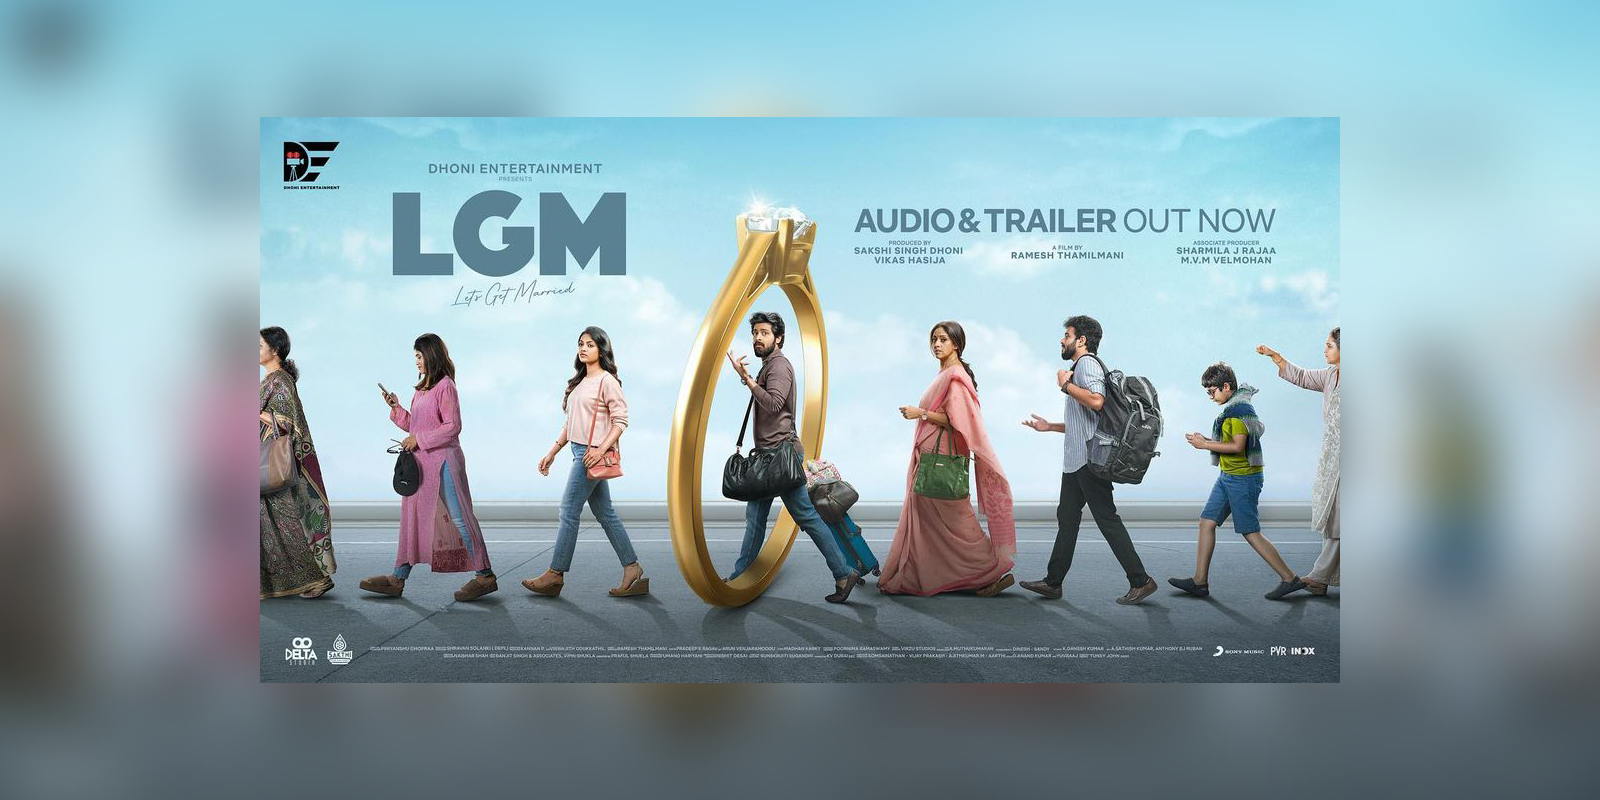 MS Dhoni launches the audio and trailer of LGM